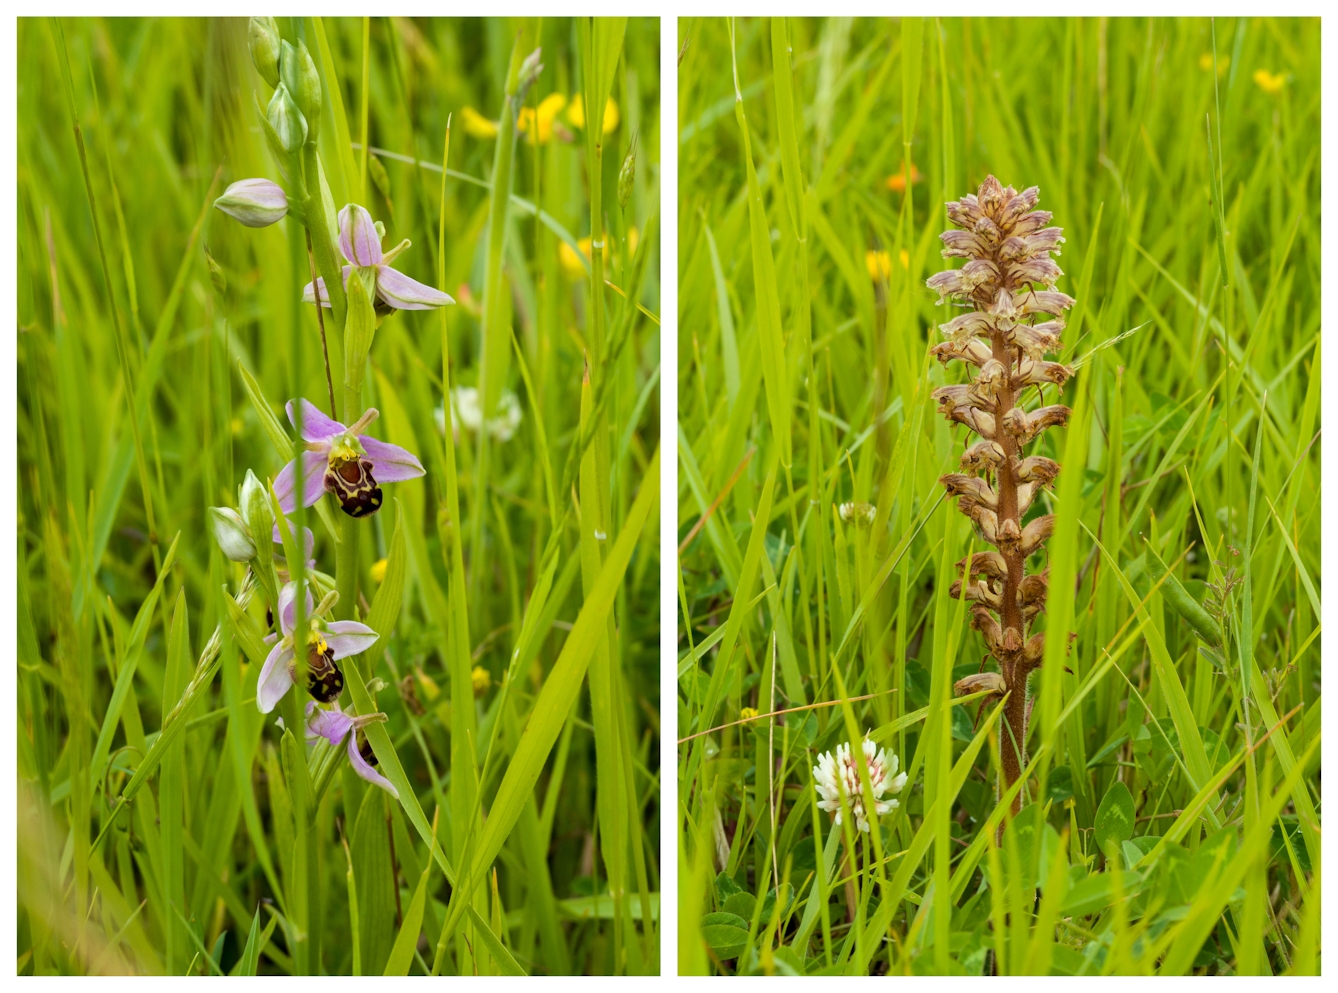 Colour photographic diptych. Both images show a close-up photograph of a growing plant specimen surrounded by tall lush green grass. The image on the left shows an example of the bee orchid, where the flower closely resembles the body of a bee. The image on the right shows an example of Broomrape, a thin flower with dense clusters of flowers emerging from close to the stem.